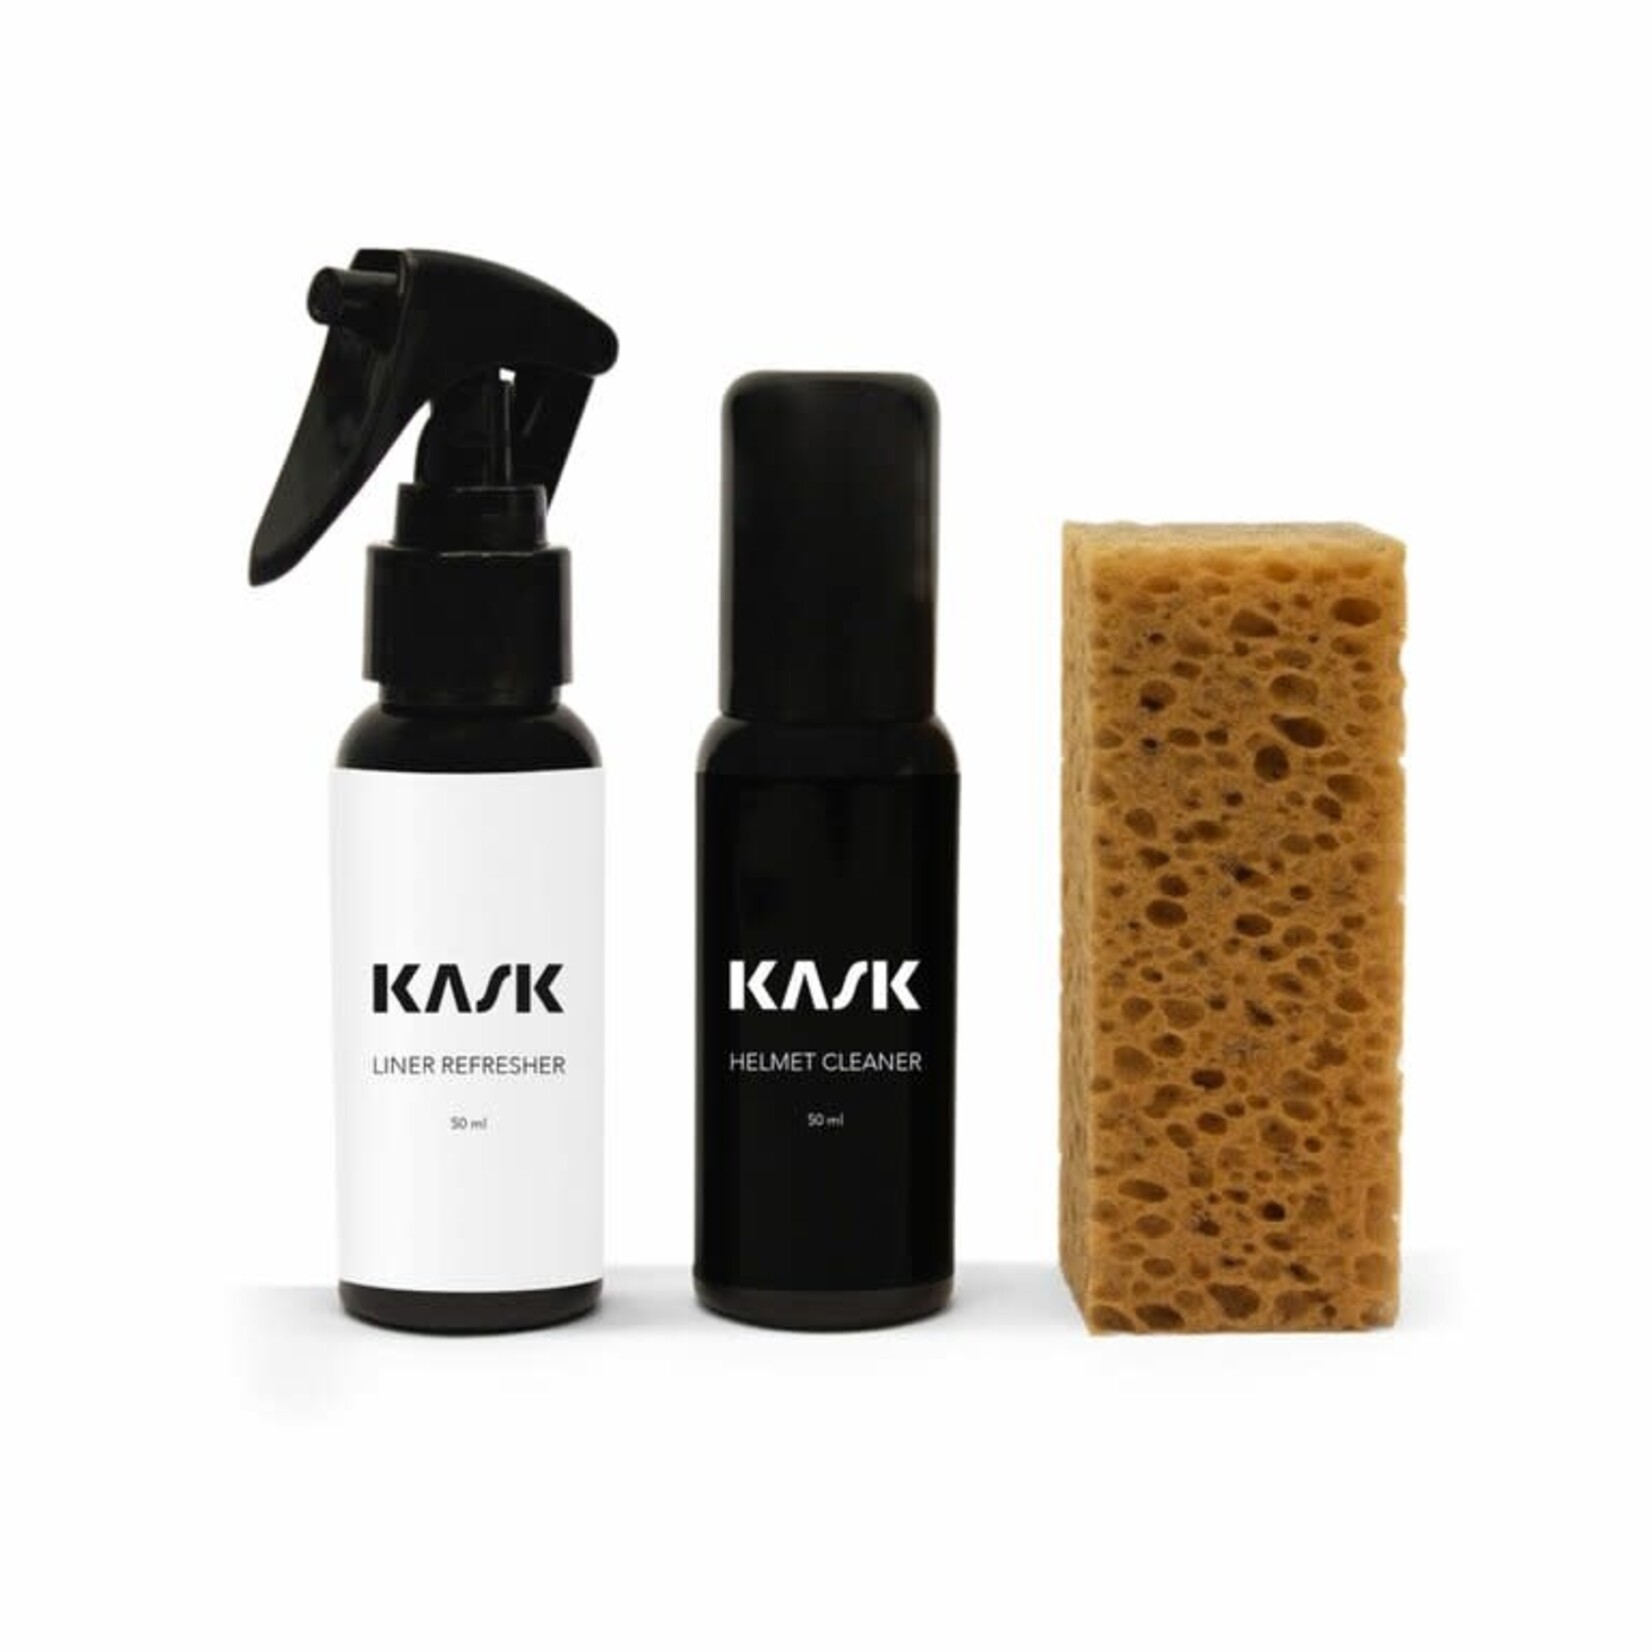 Kask Kask cleaning kit